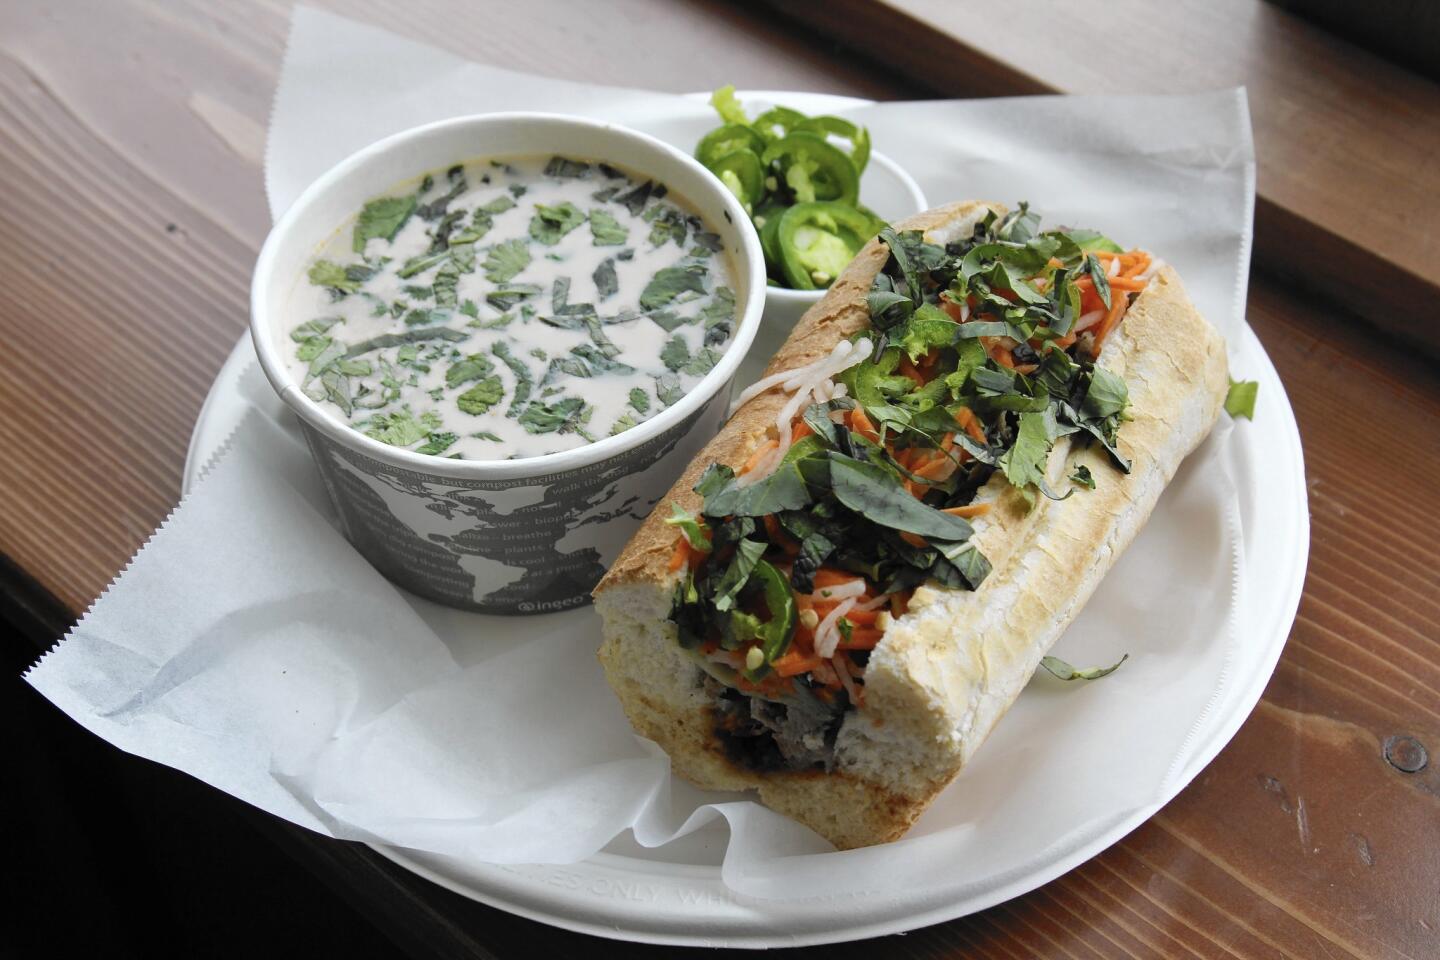 On the lunch menu at Red Pine Lodge, Thai chicken coconut soup complements sweet chili pork banh mi.